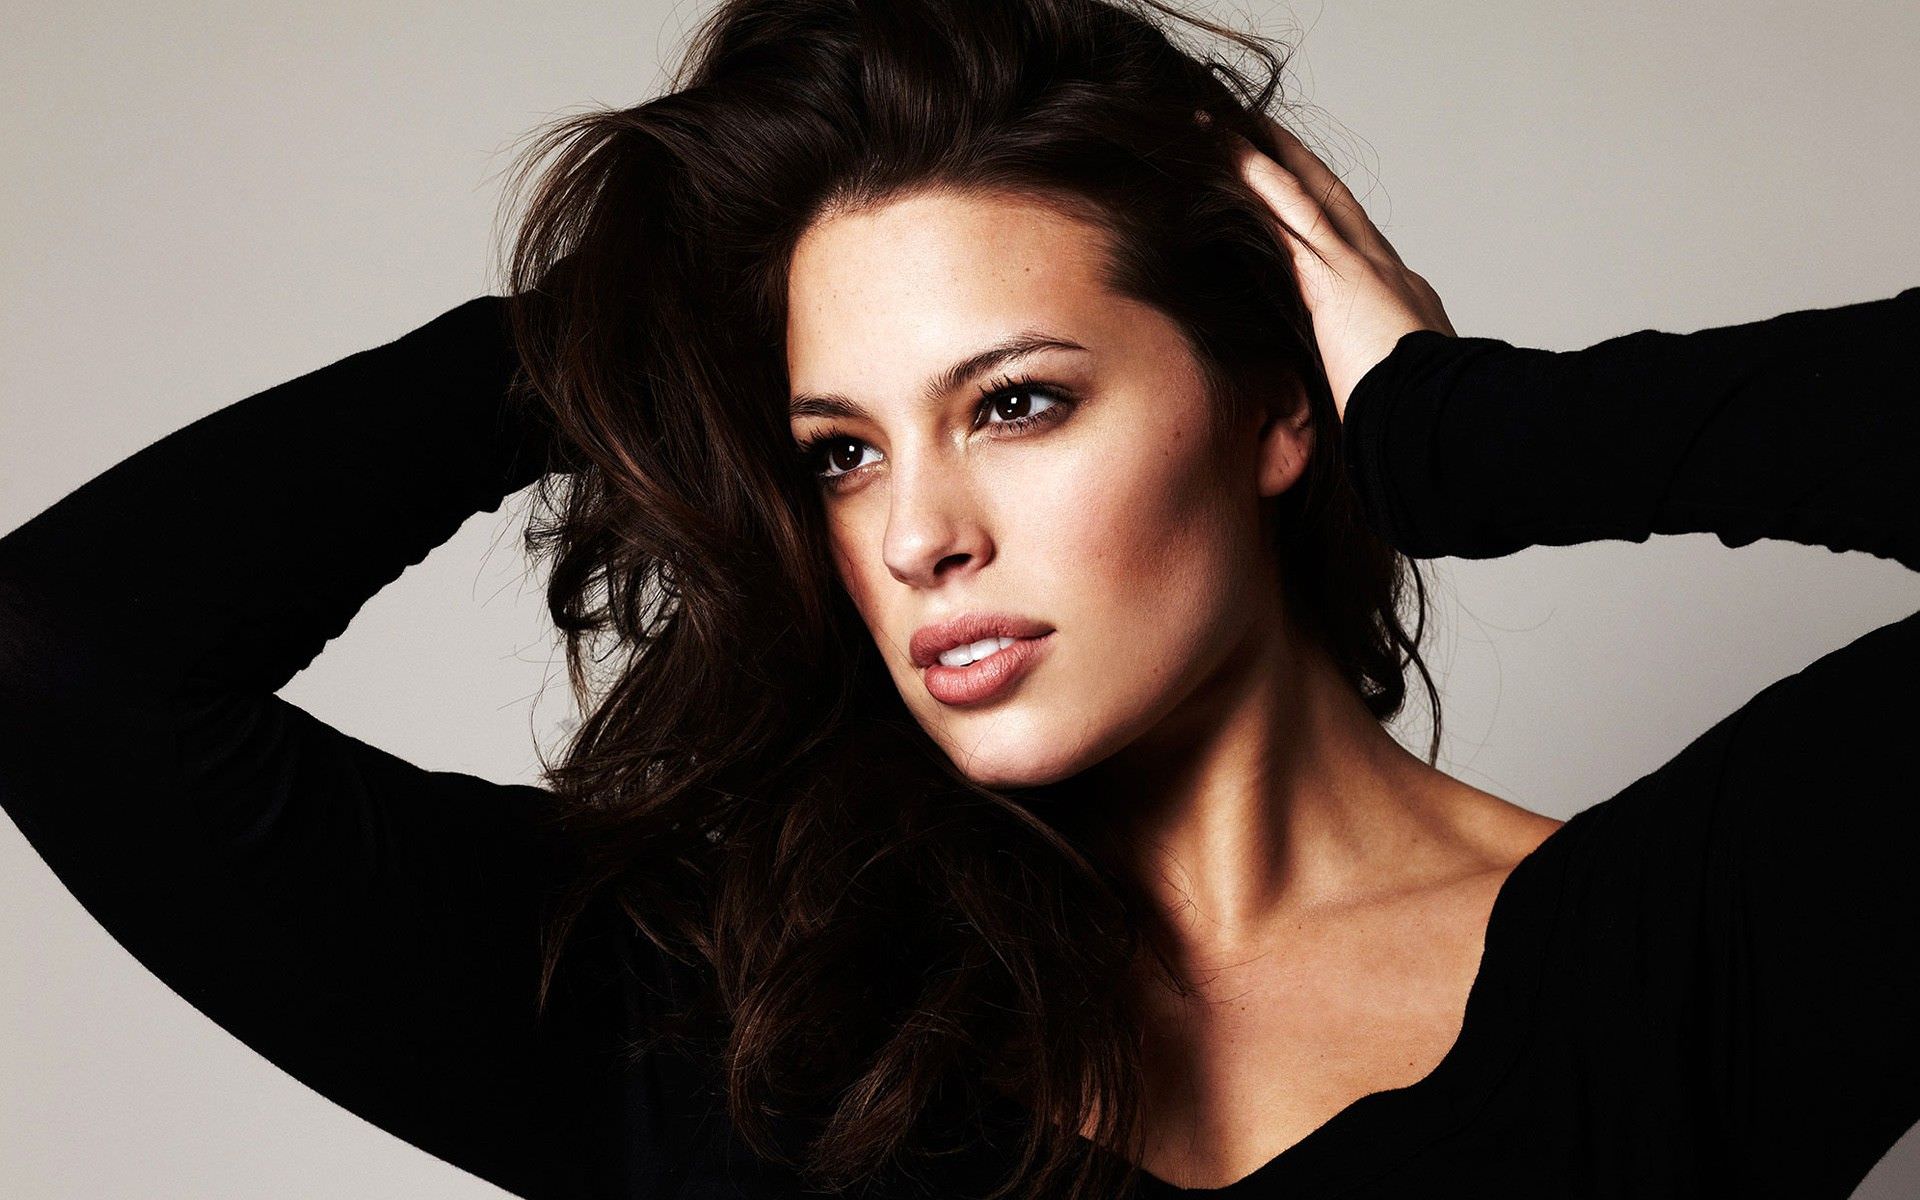 Ashley Graham (Resident Evil) wallpapers for desktop, download free Ashley  Graham (Resident Evil) pictures and backgrounds for PC